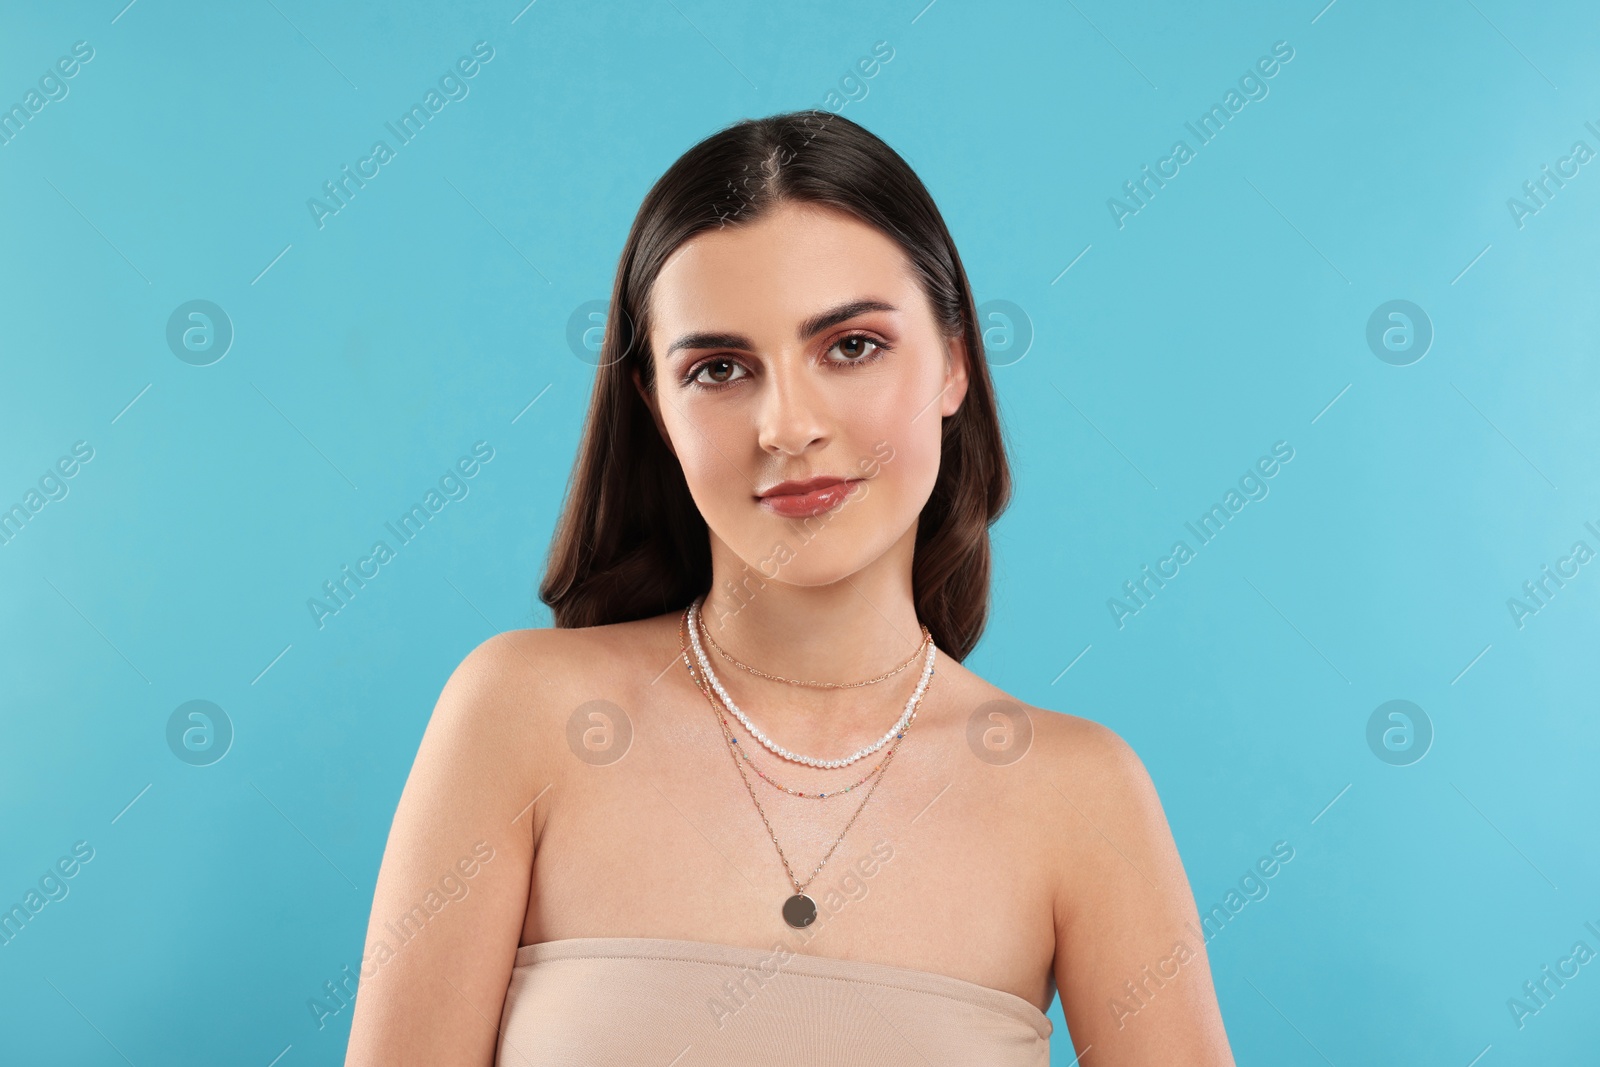 Photo of Beautiful woman with elegant necklaces on light blue background